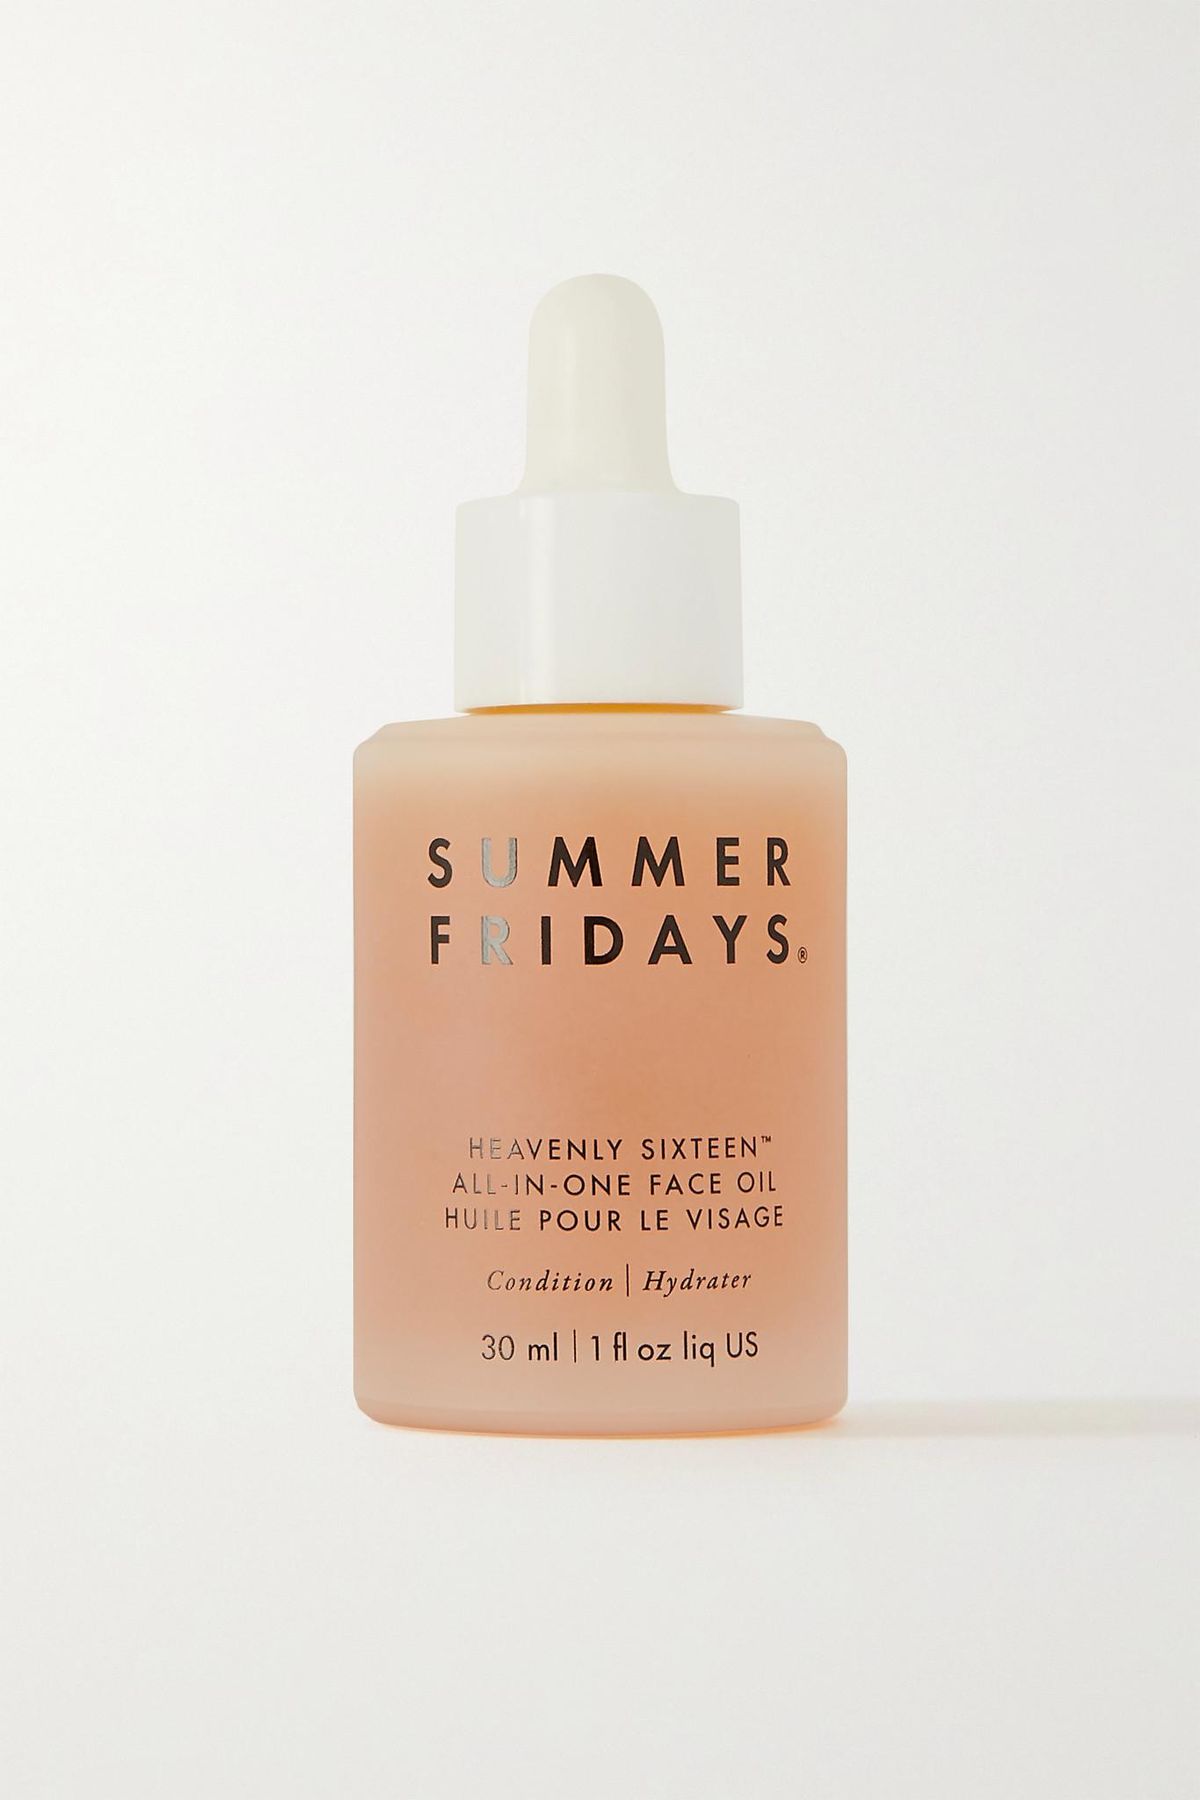 summer fridays heavenly sixteen all in one face oil